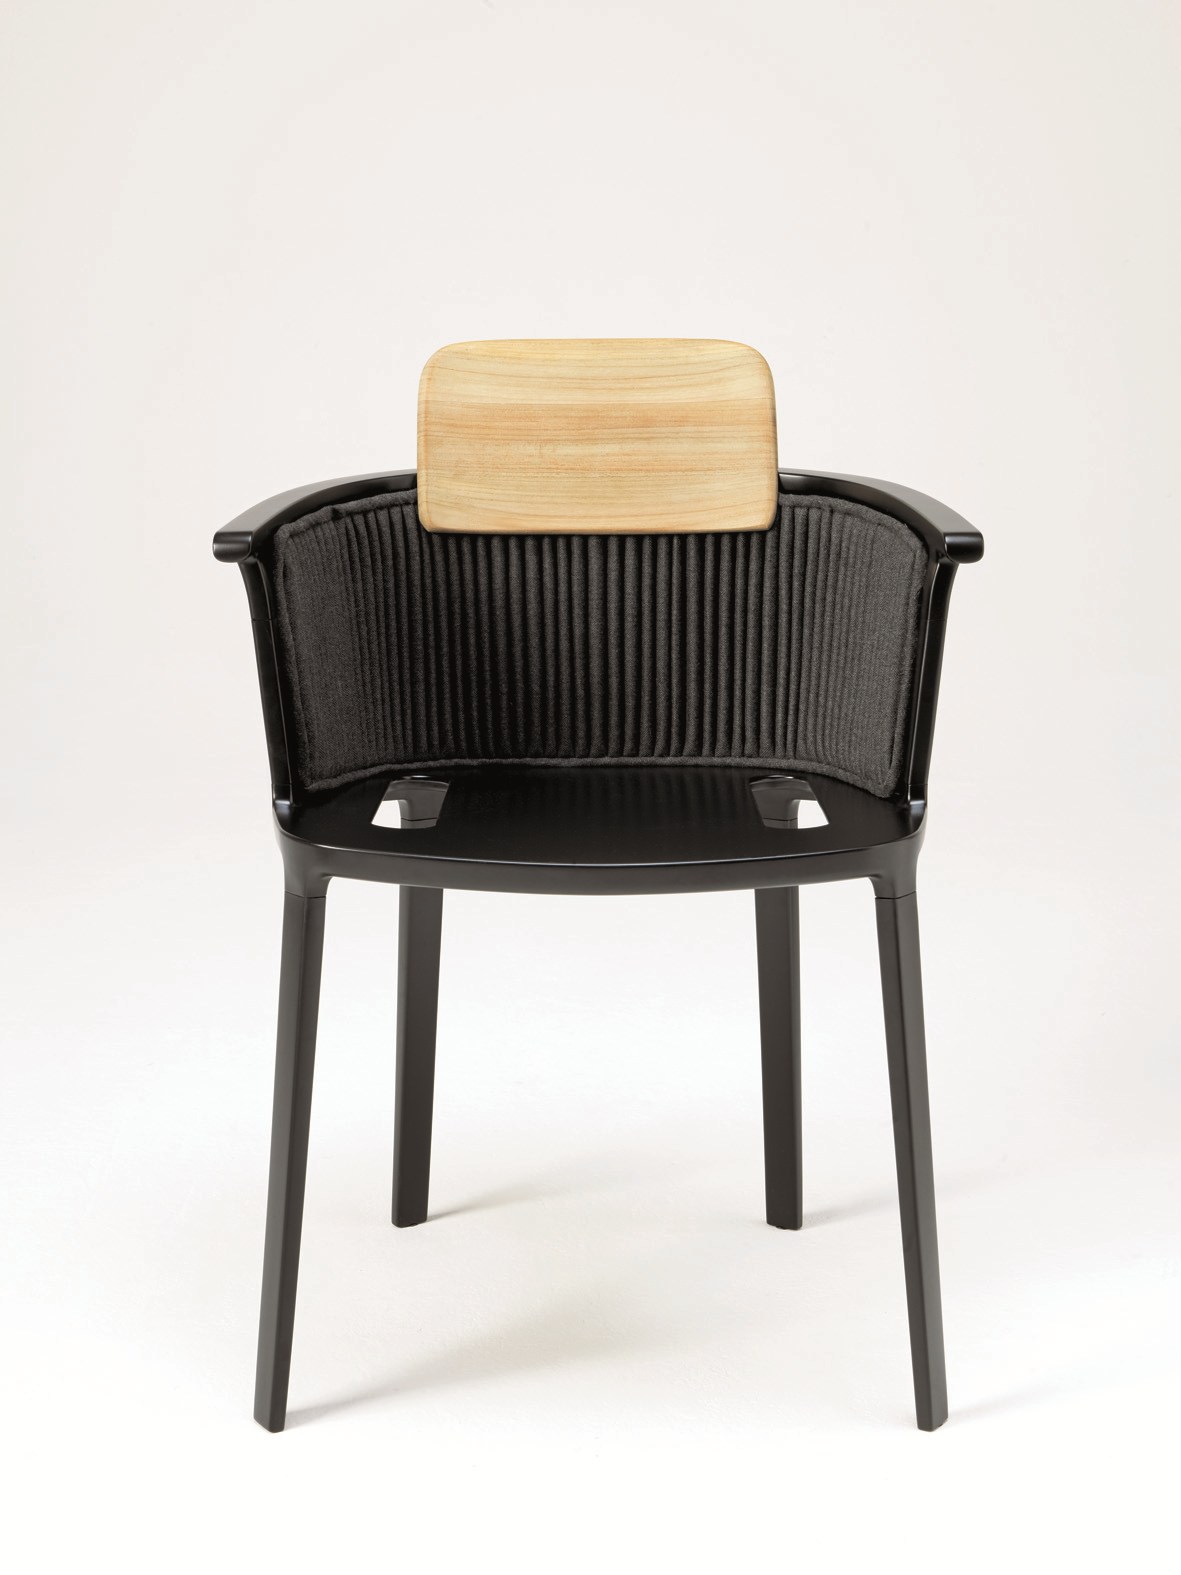 Nicolette Garden Chair by Patrick Norguet for Ethimo